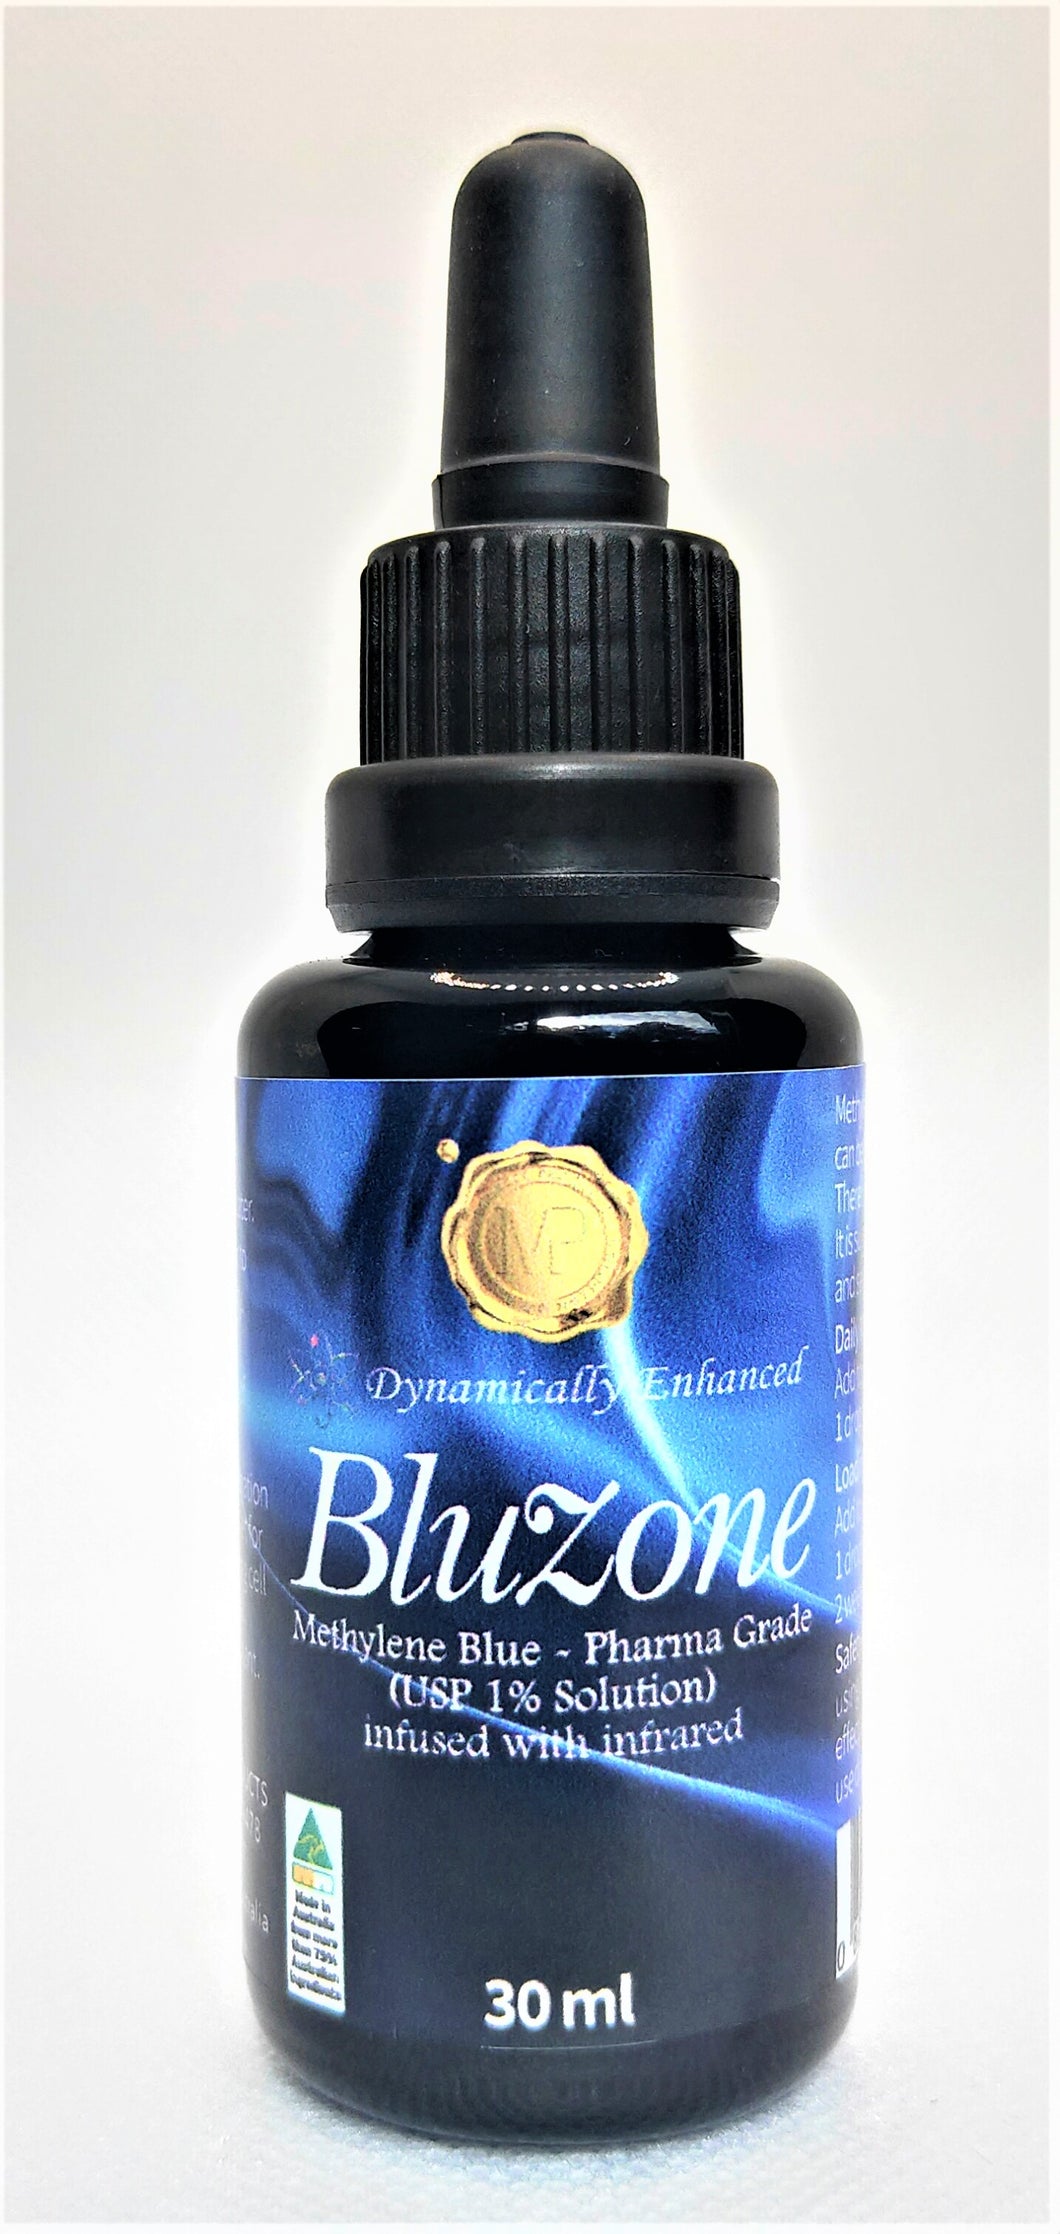 BluZone - Methylene Blue (Click image to select size: 30ml or 100ml)